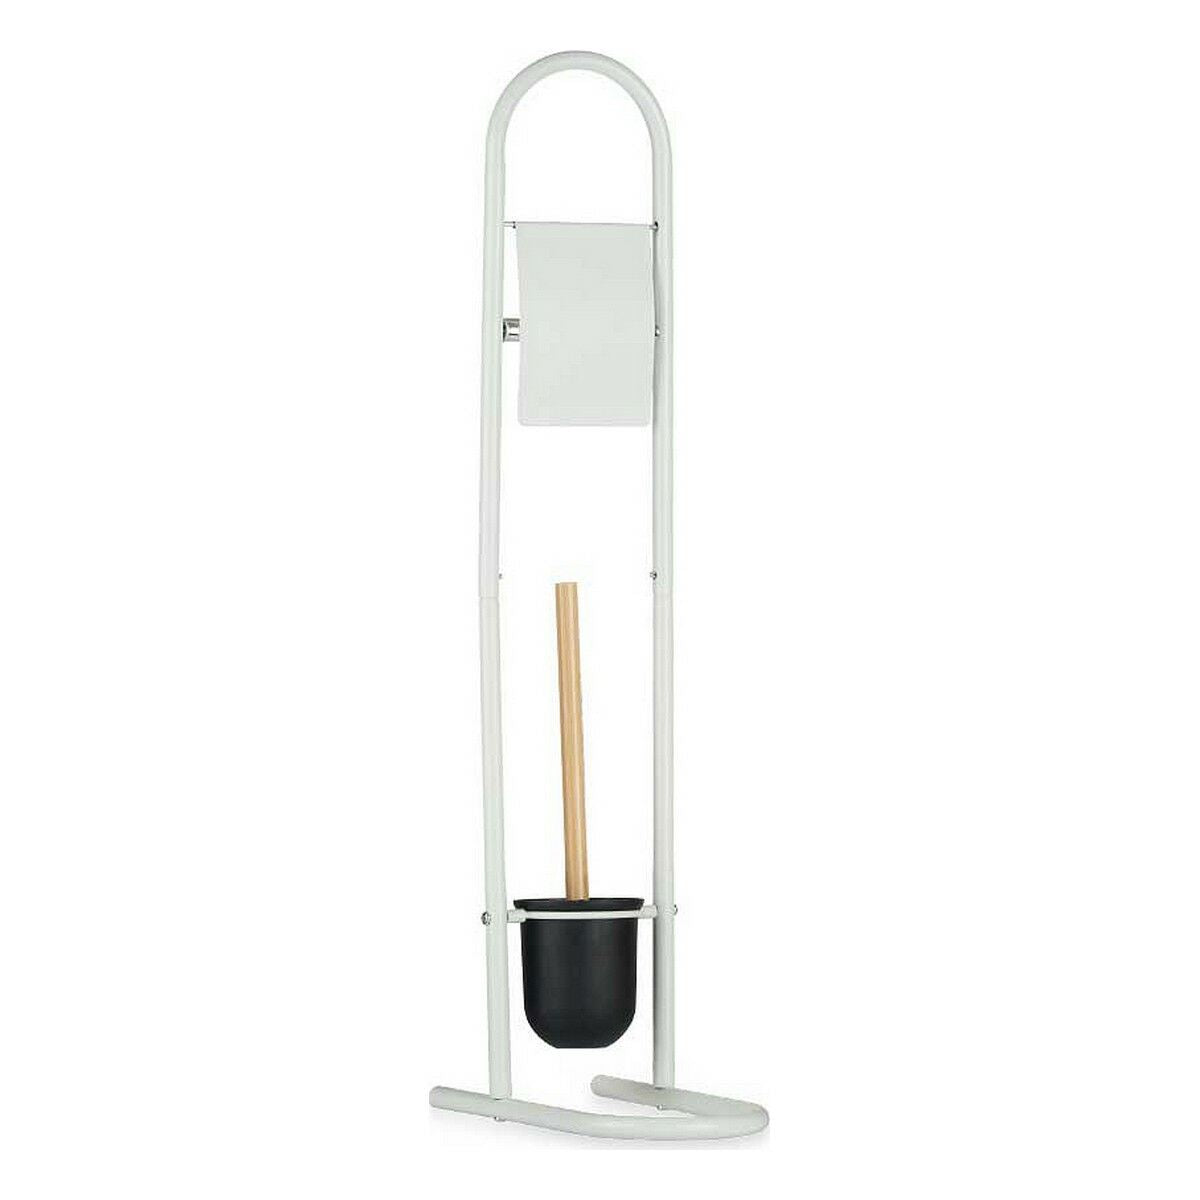 Toilet Paper Holder with Brush Stand 16 x 28,5 x 80,8 cm Metal White Plastic Bamboo (4 Units)